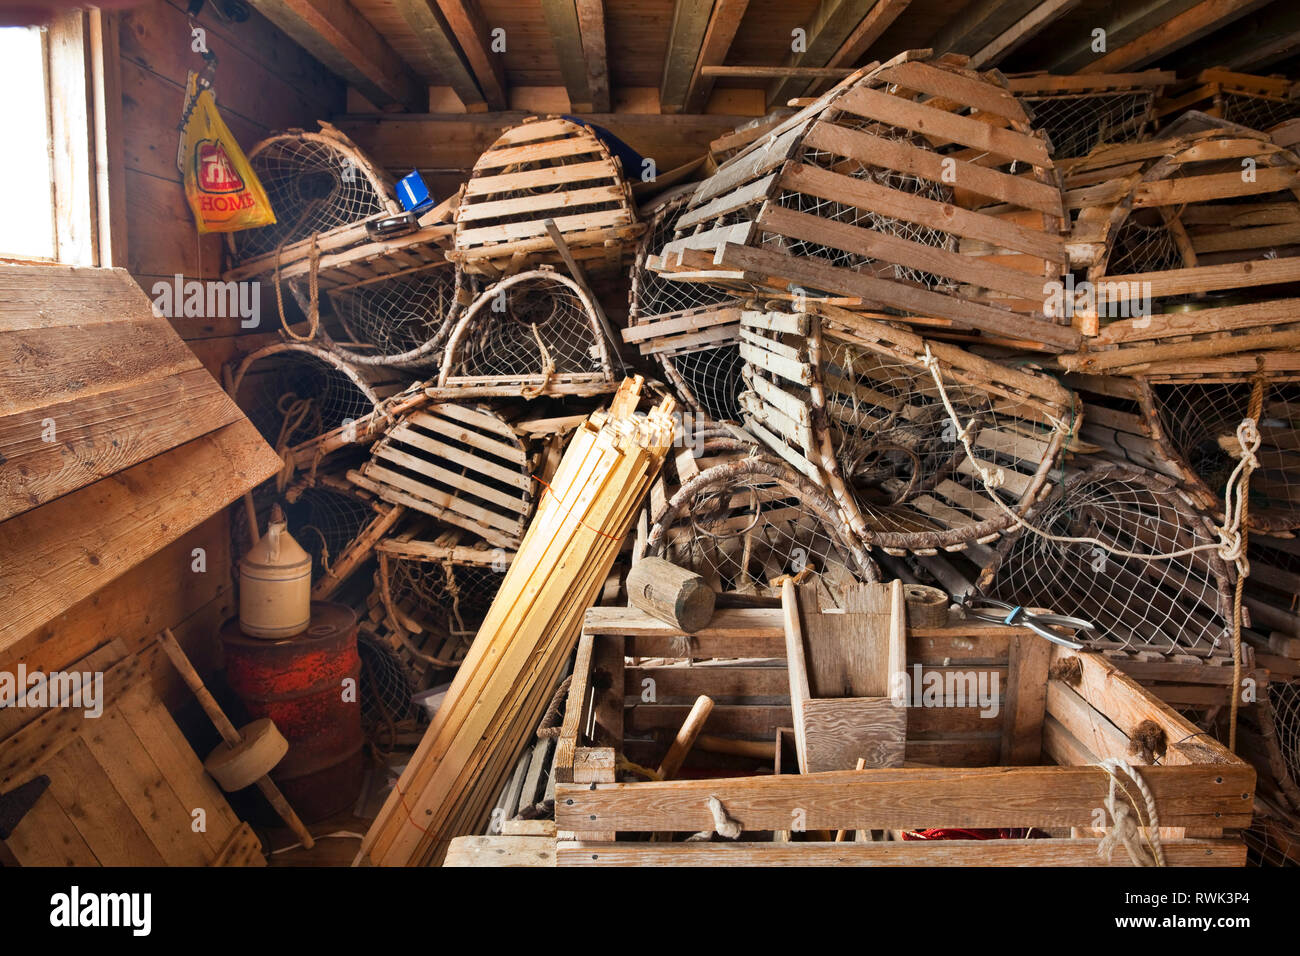 Lobster traps stacked on top of each other and materials for repairing them stored in a fishing shed at Broom Point Fishing Premises, Gros Morne National Park, Parks Canada, Western Newfoundland, Canada Stock Photo